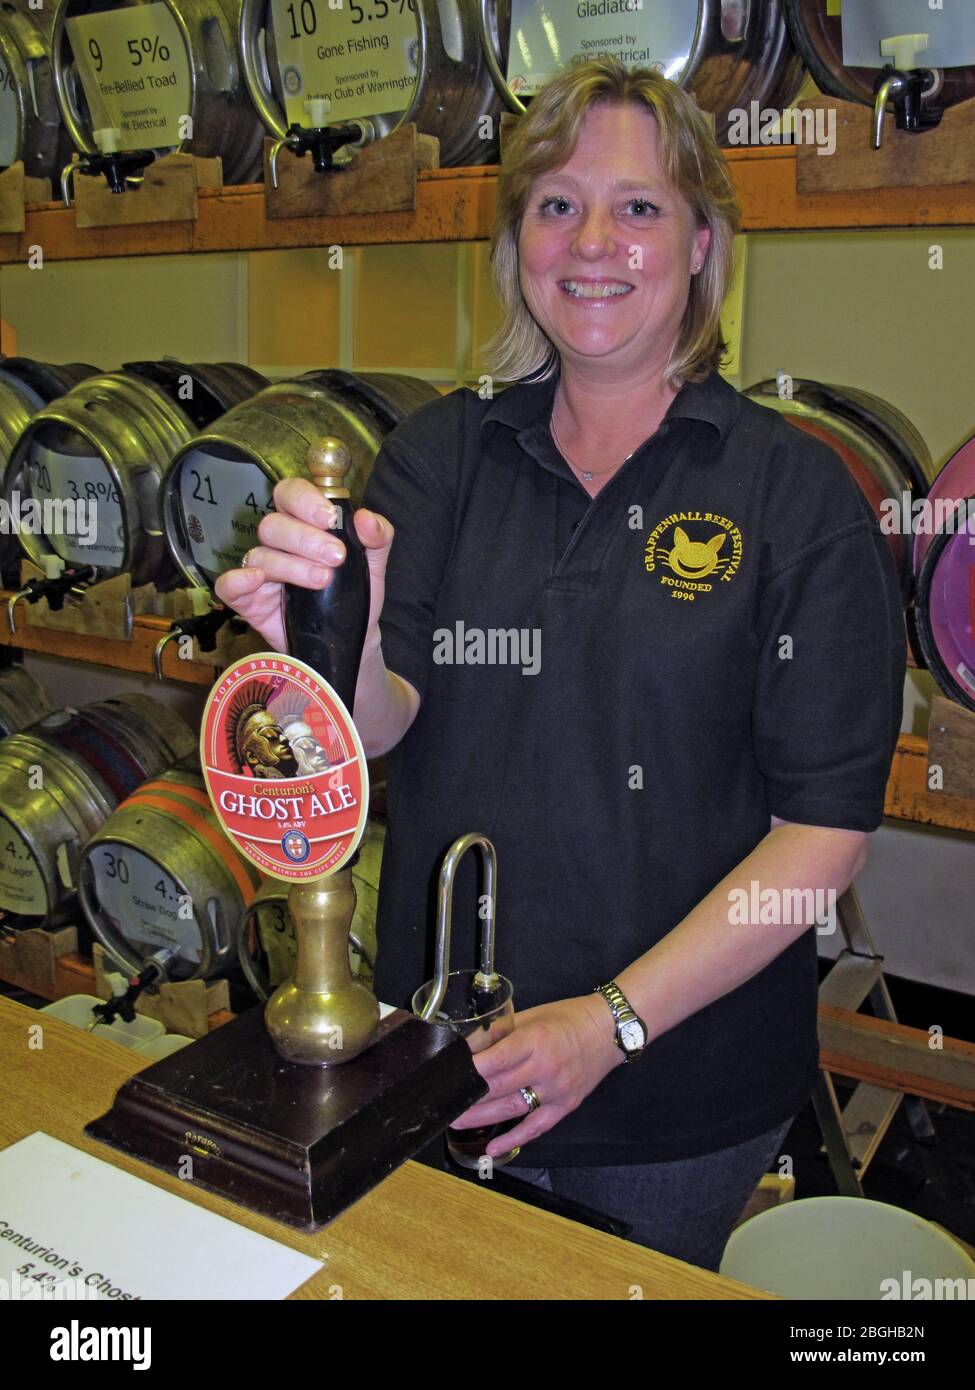 Lady Pulling Pint, Grappenhall Beer Festival, GYCA, Grappenhall Youth & Community Center, Bellhouse Lane, Grappenhall, Warrington, Cheshire, England, WA4 2SG Stockfoto